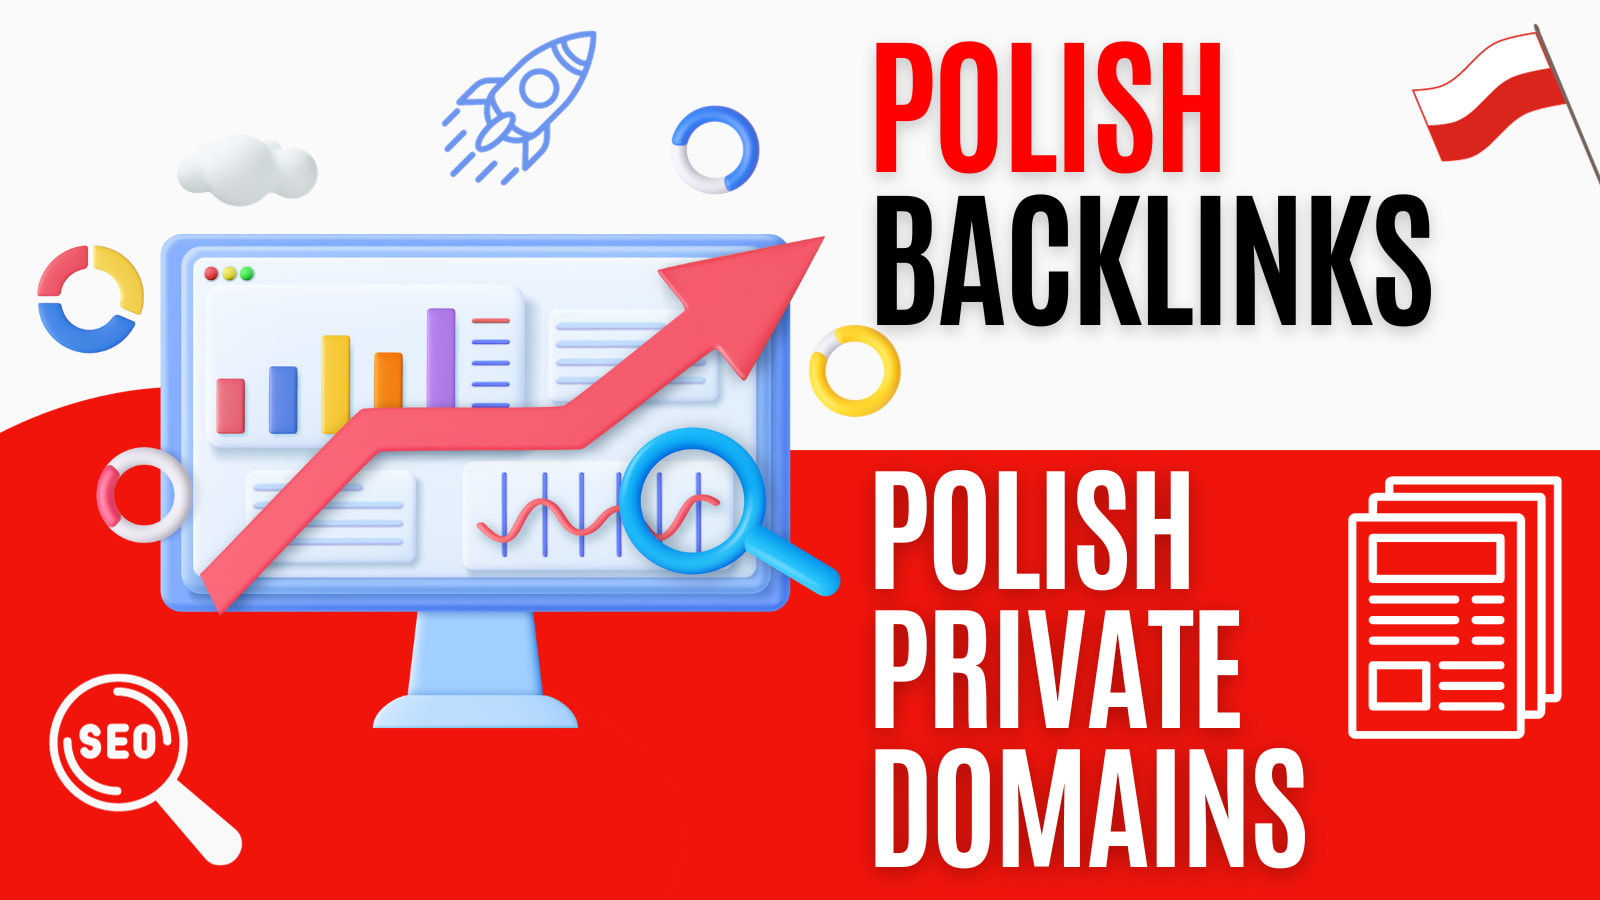 I will guest post on polish poland websites